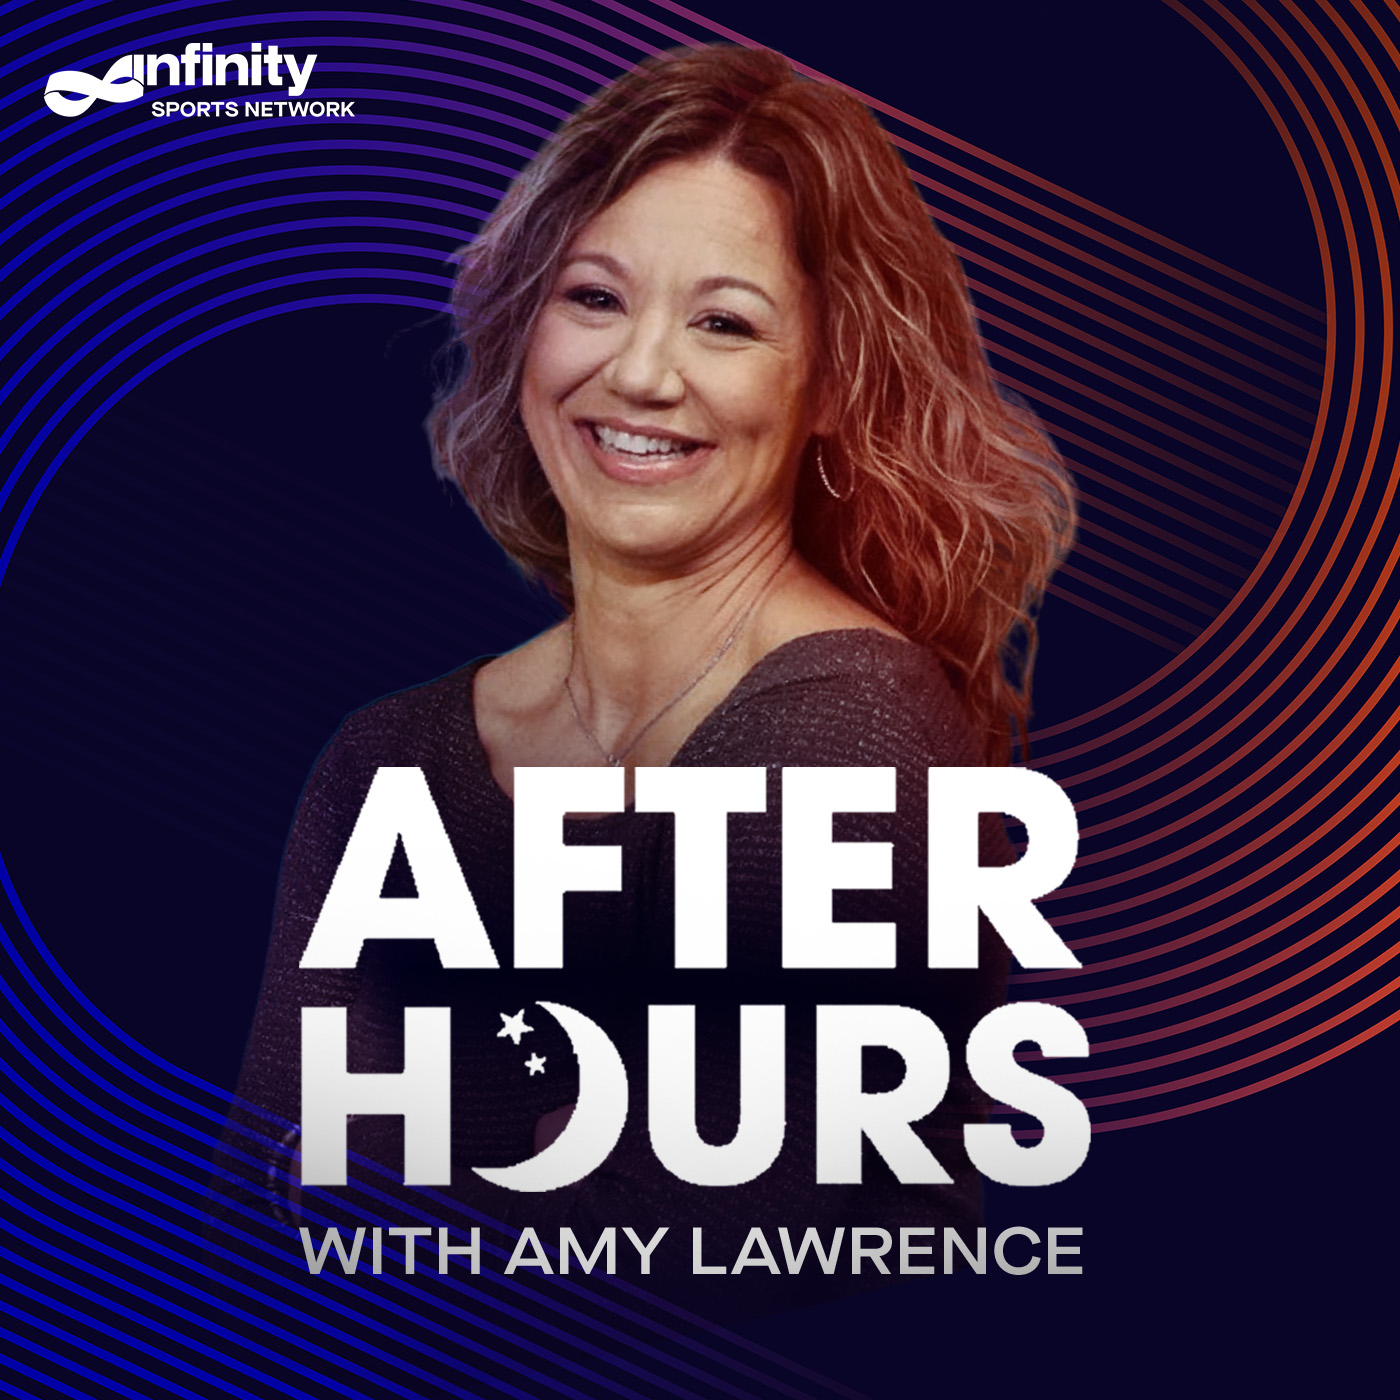 11-19-21 After Hours with Amy Lawrence PODCAST: Hour 1